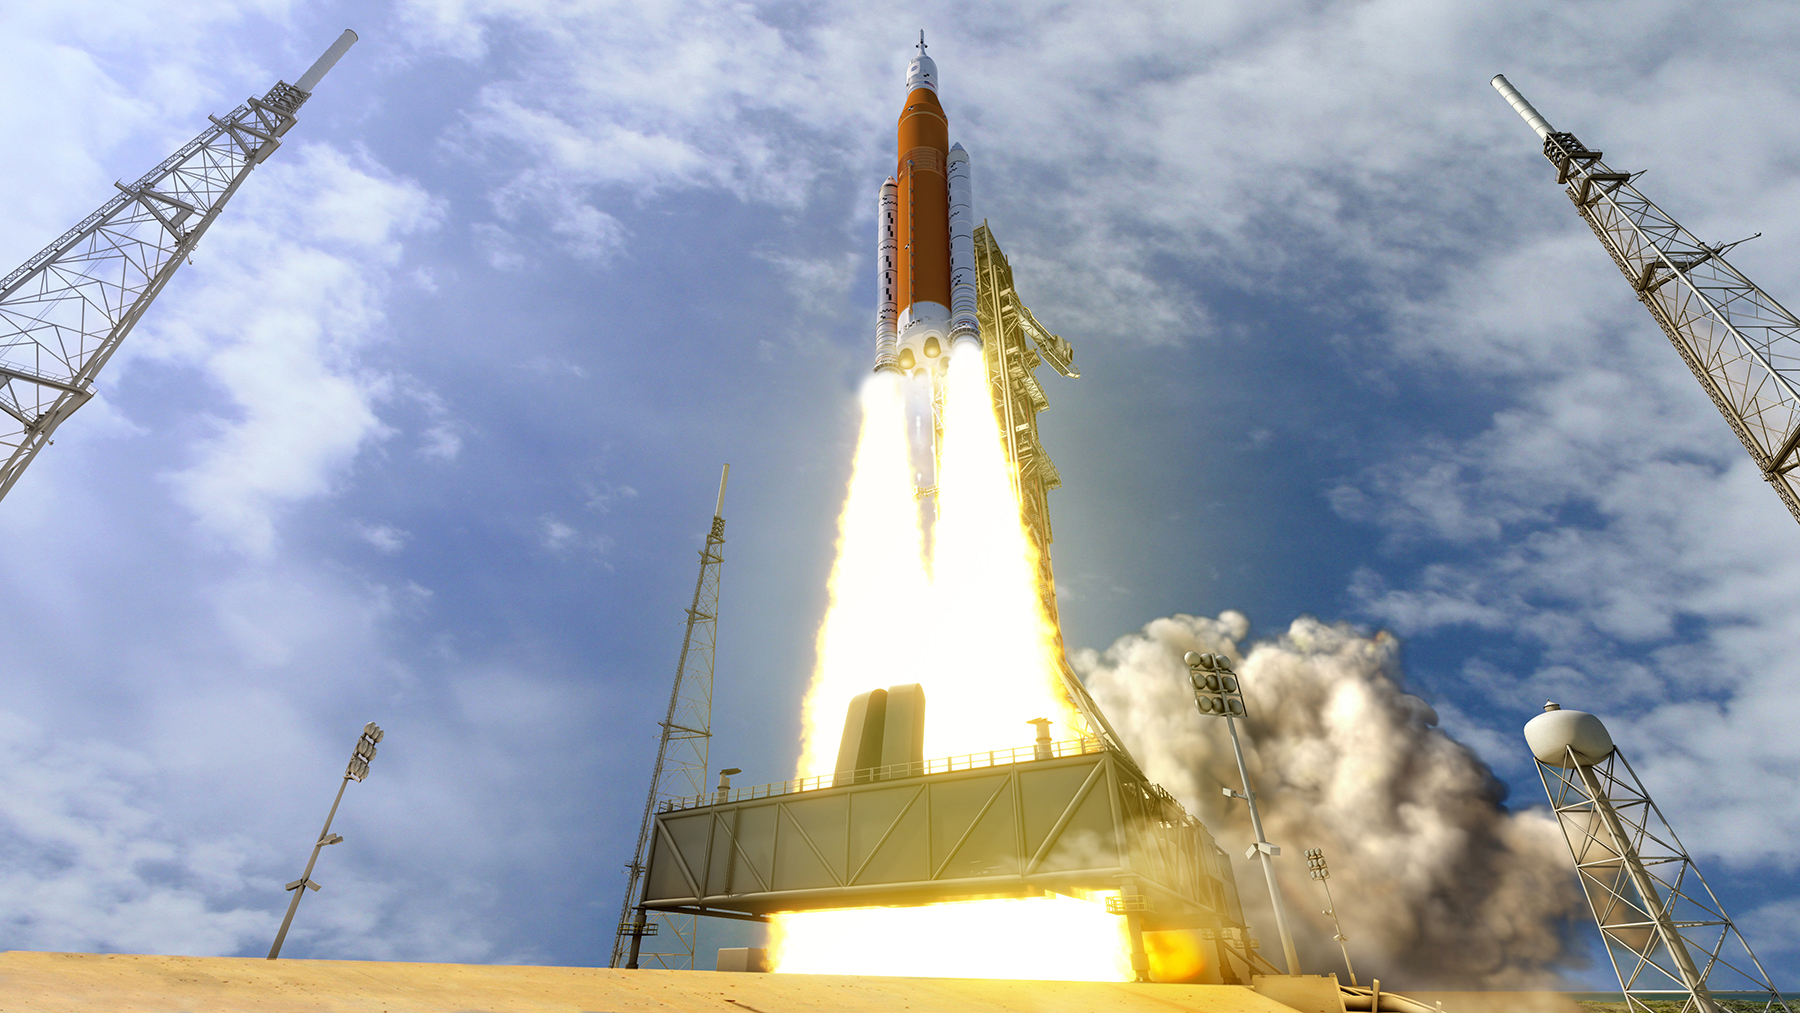 NASA's Orion spacecraft, Space Launch System rocket, and other systems being built and tested, will advance technology.